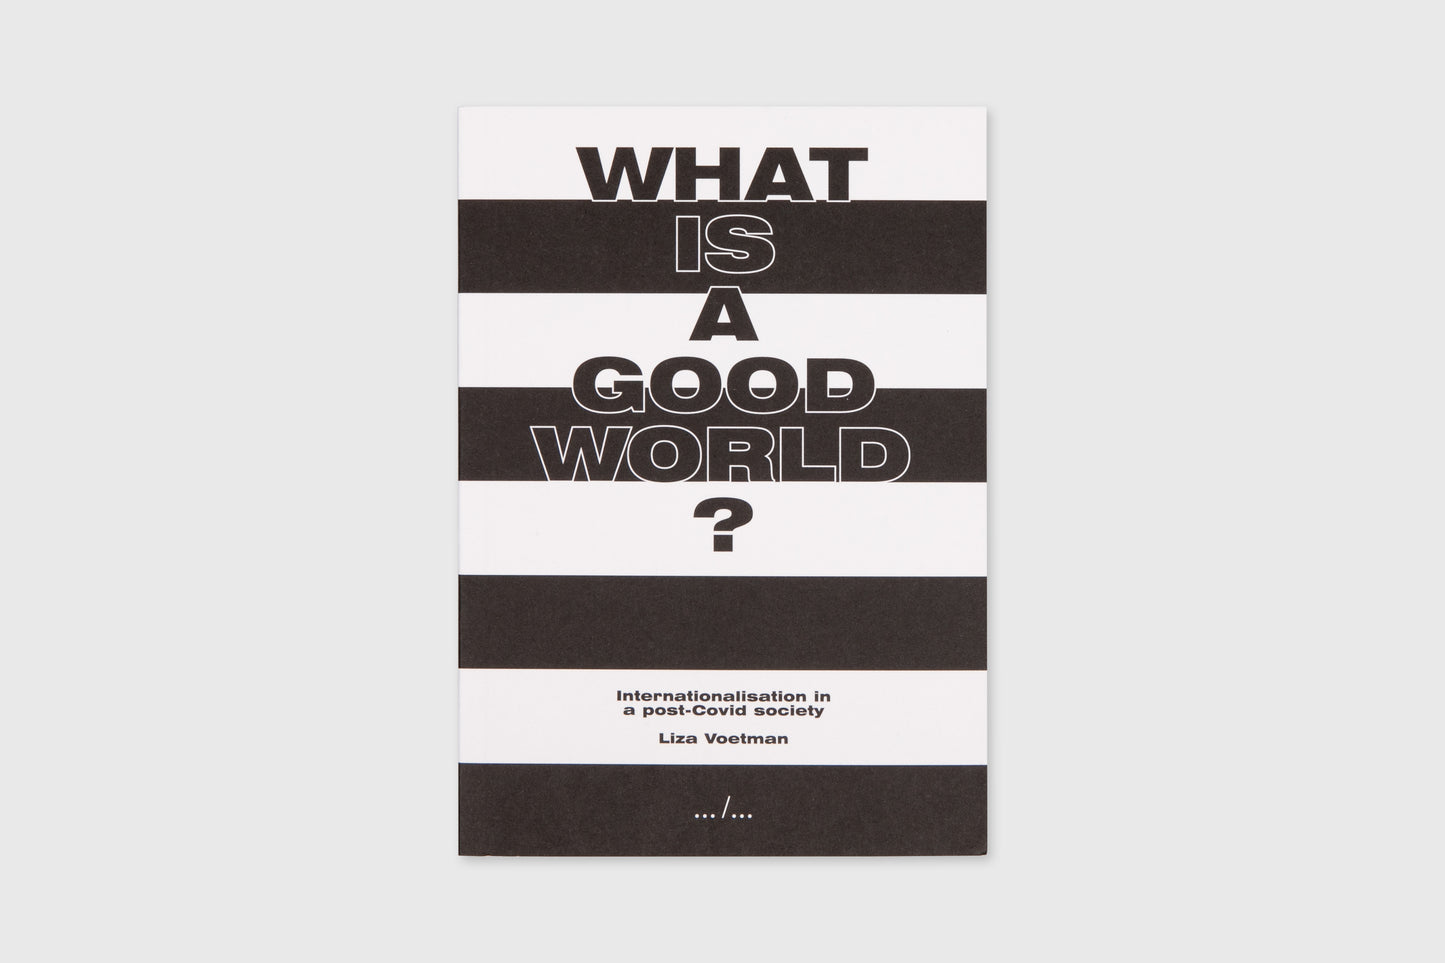 What is a good world?